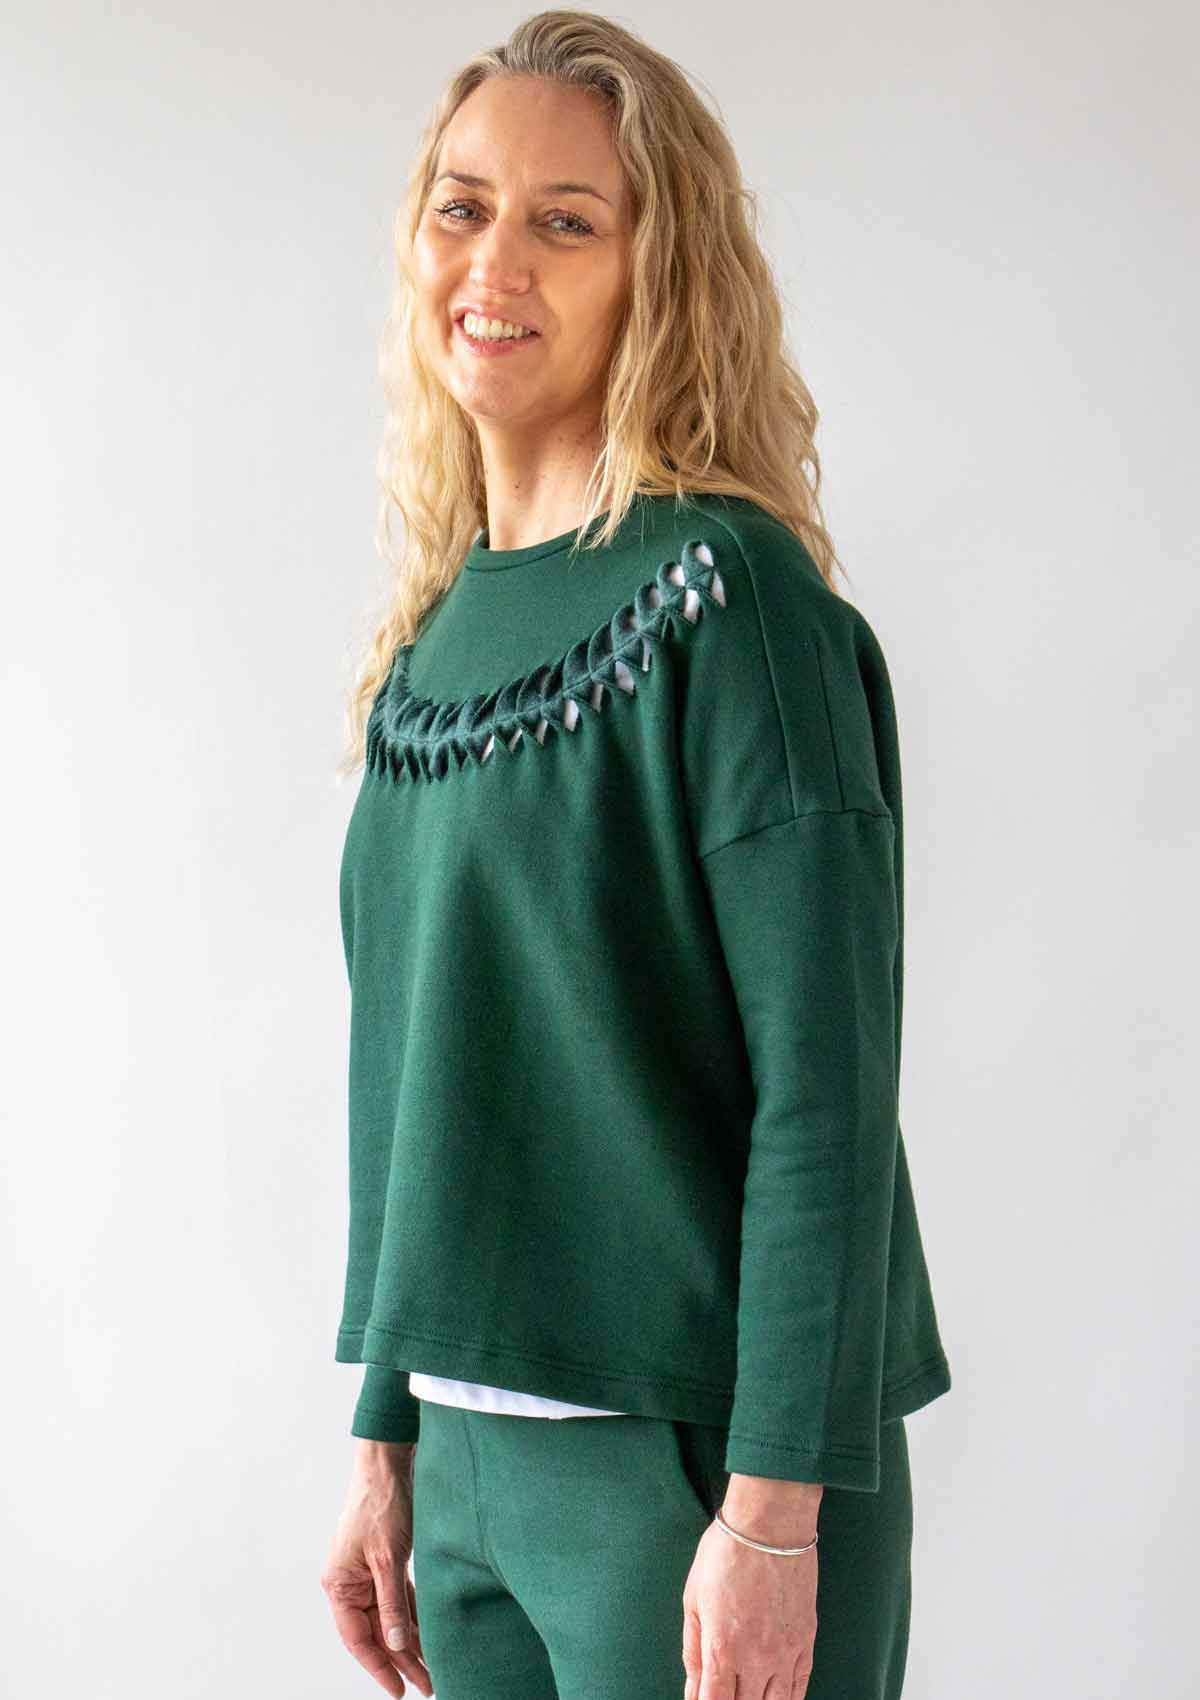 4.	Woman smiling, with long wavy blond hair, wearing the Asmuss Anni Sweatshirt with the Cut Twist and Stitch detailing